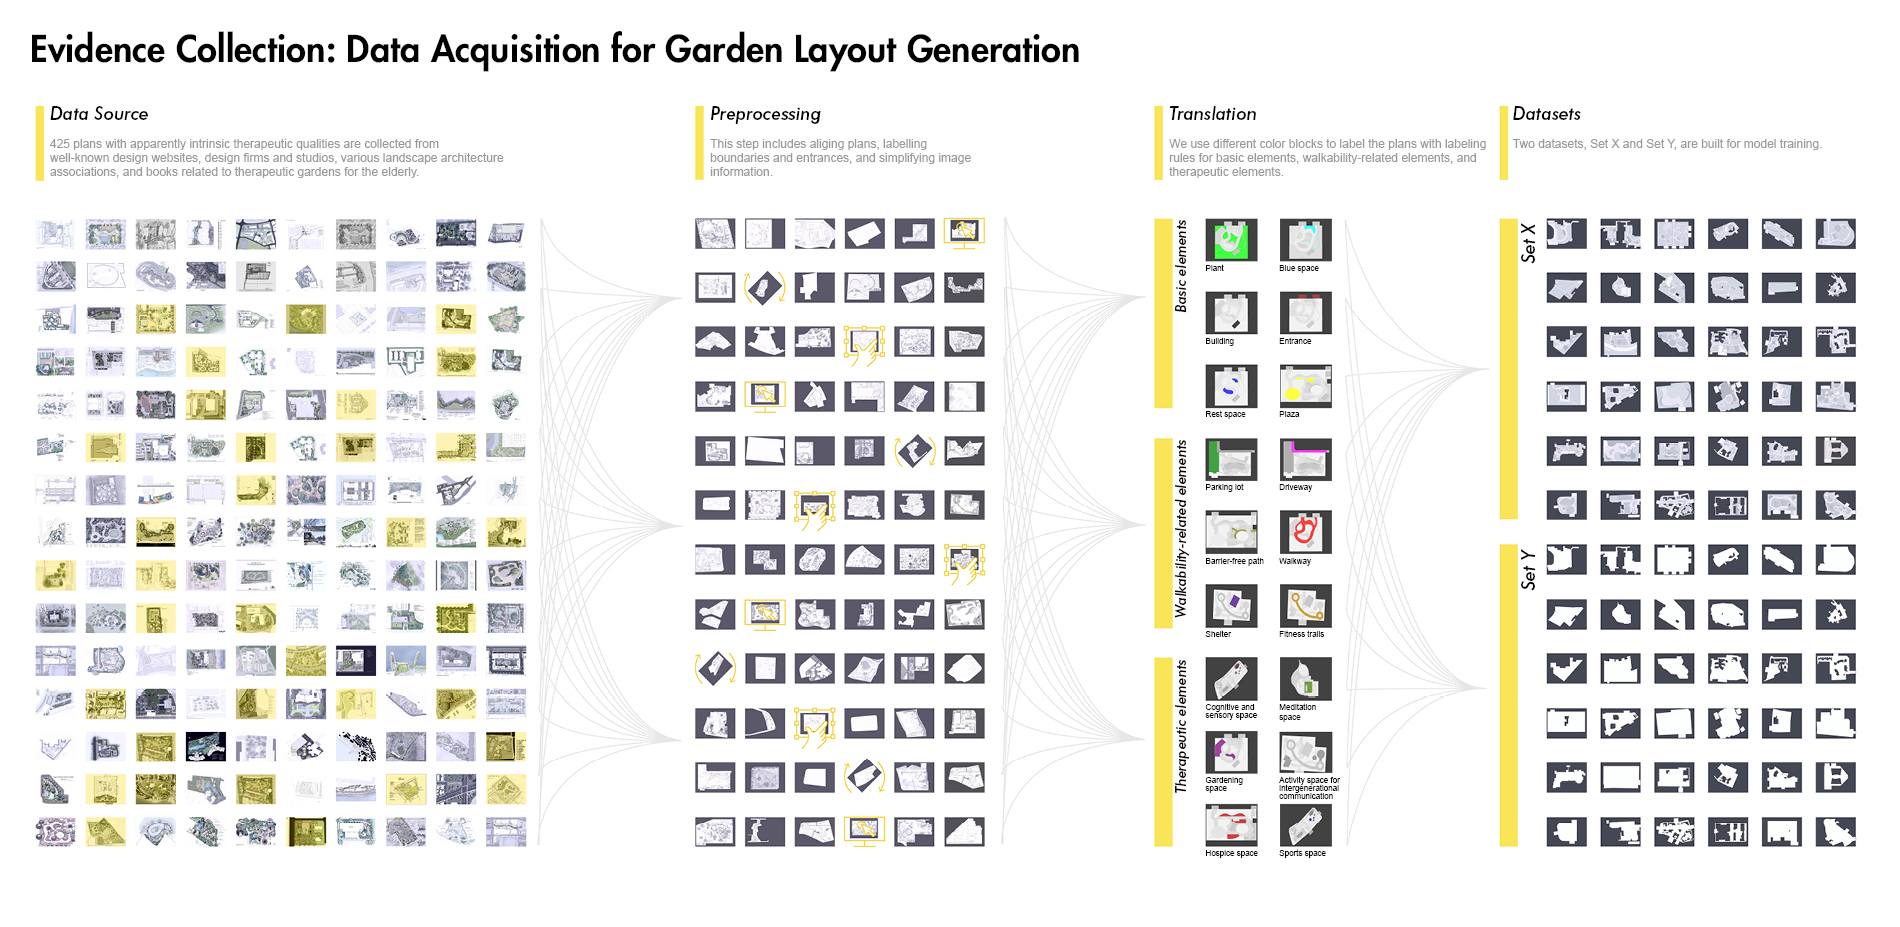 Evidence Collection: Data Acquisition for Garden Layout Generation